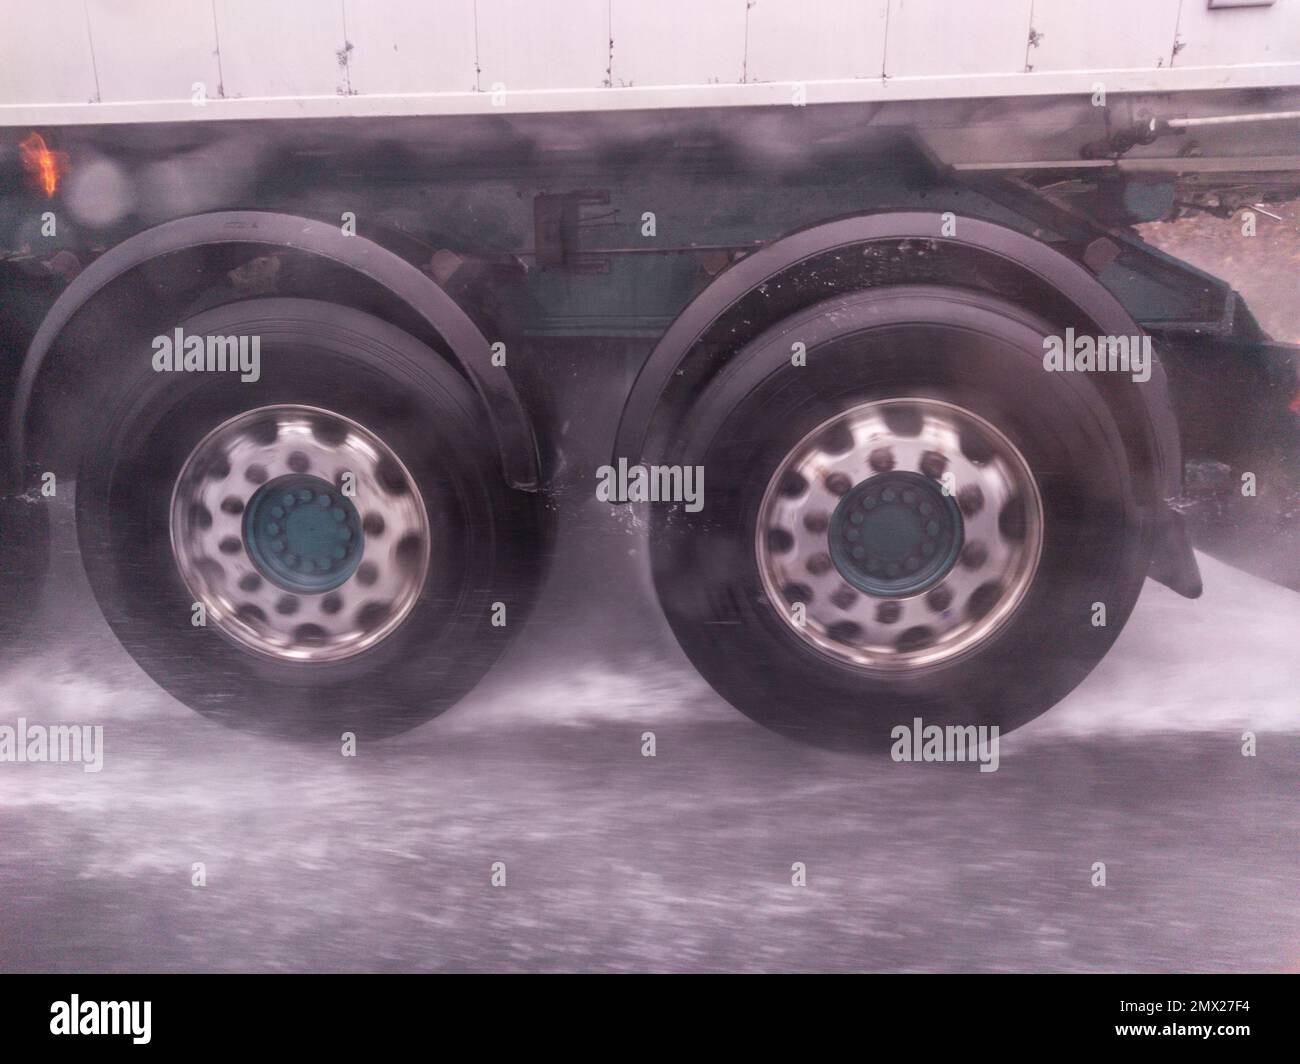 Truck wheels splashing water on road. Bad-weather driving concept Stock Photo